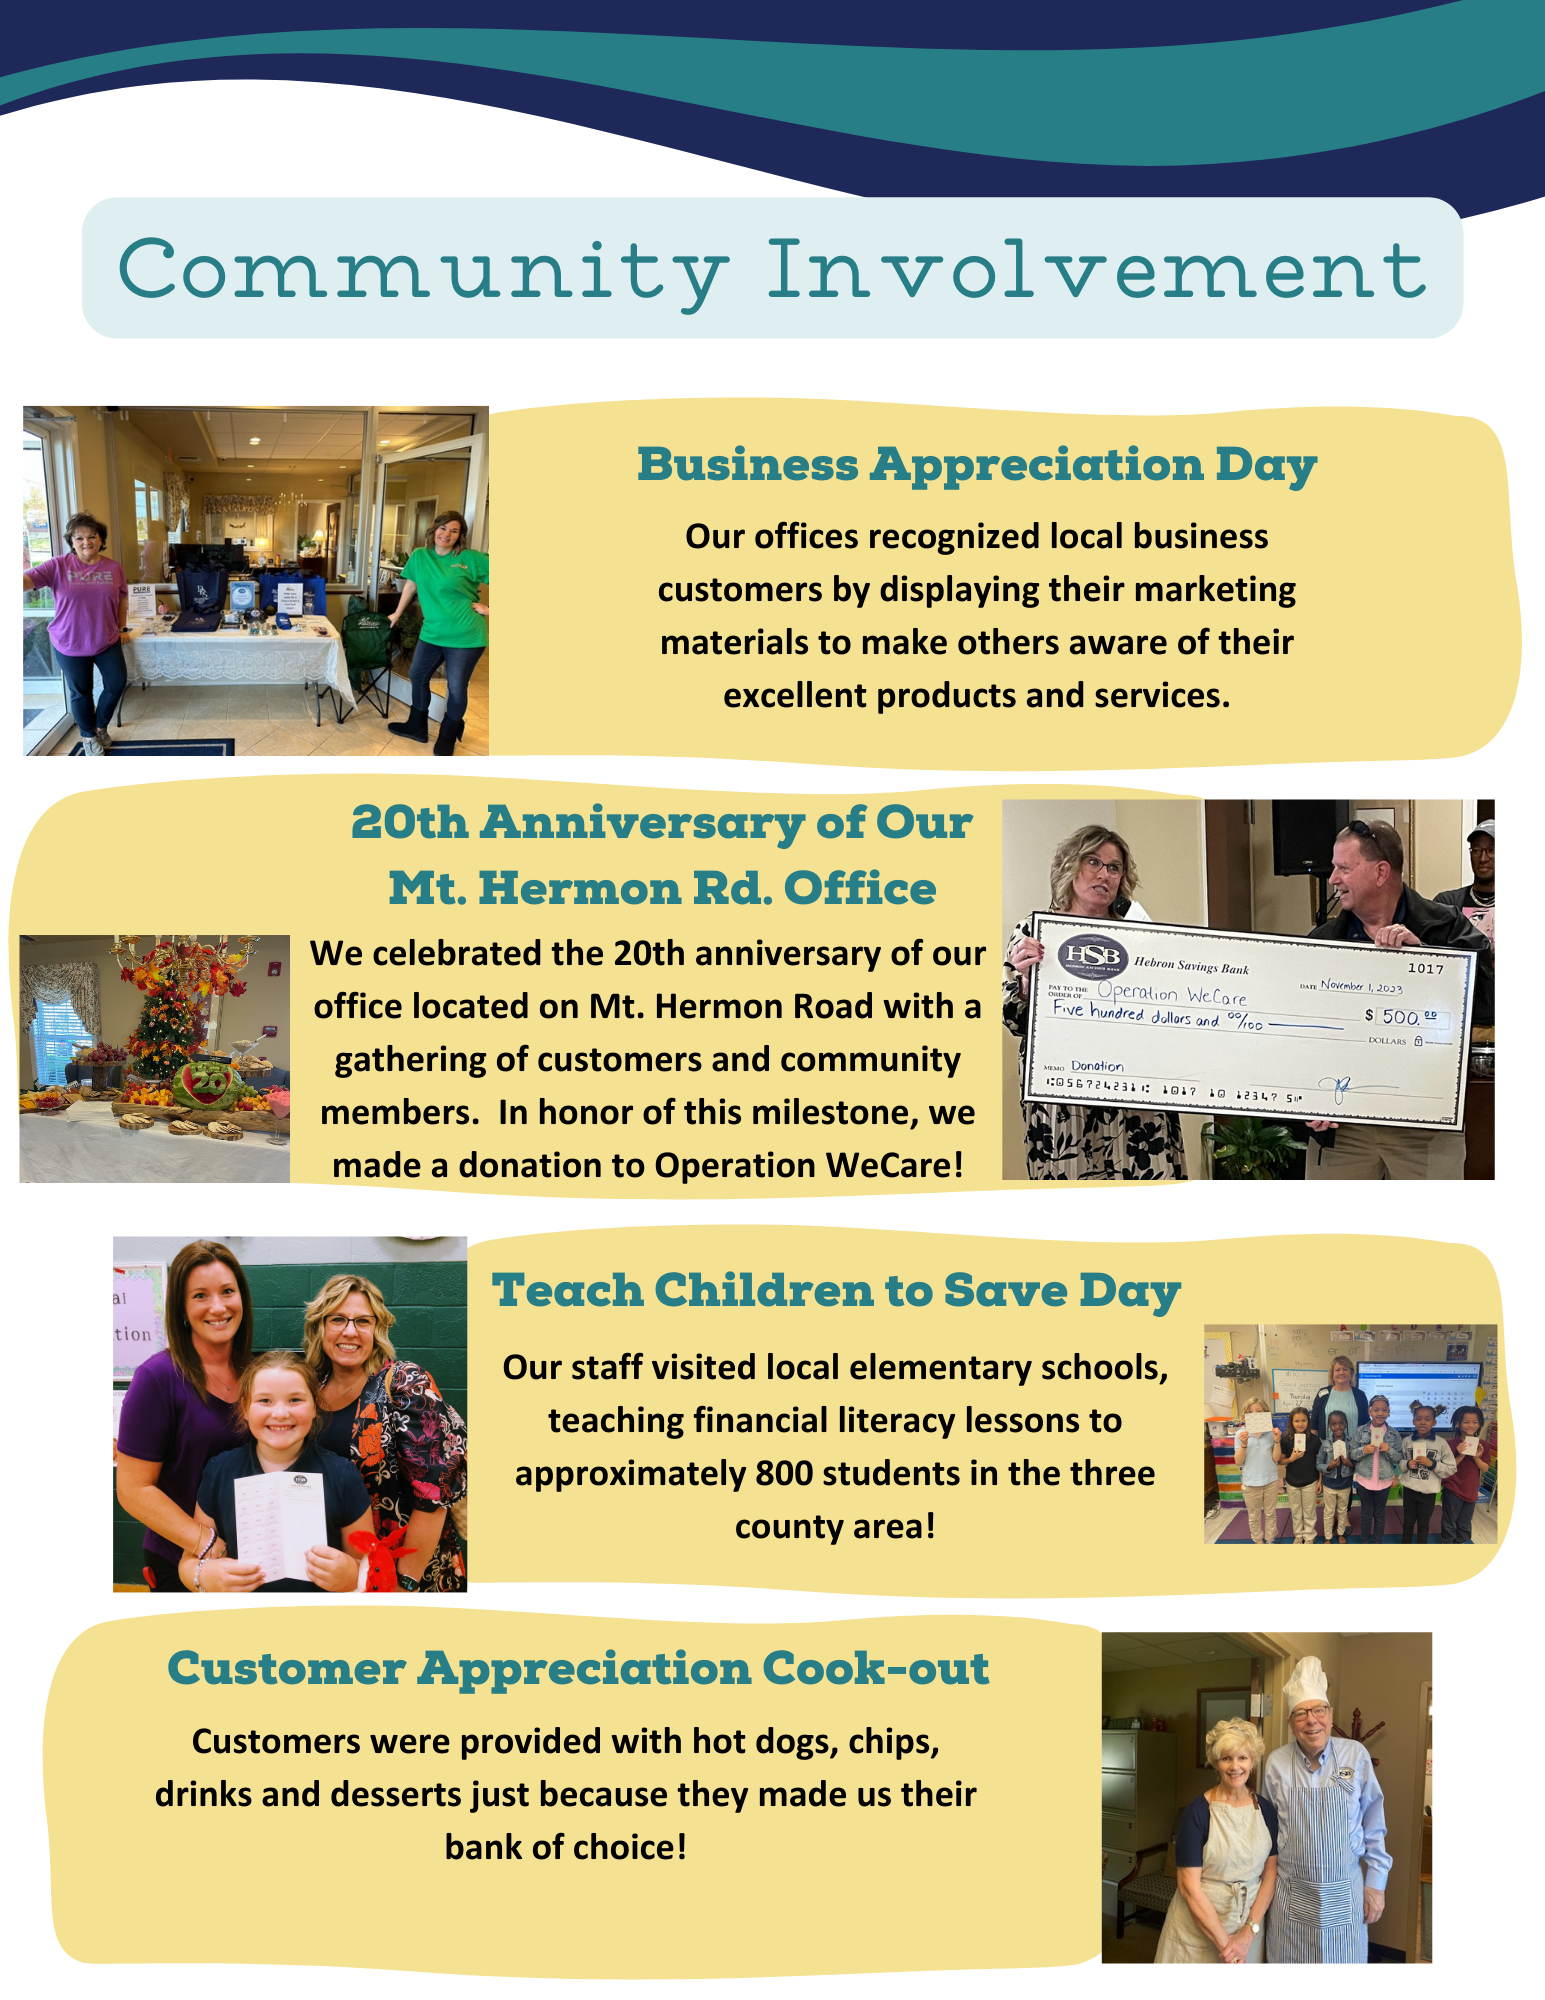 Community Involvement poster showcasing Business Appreciation day, 20th Anni. of Mt. Hermon Rd. office, Teach Children to Save day and Customer Appreciation